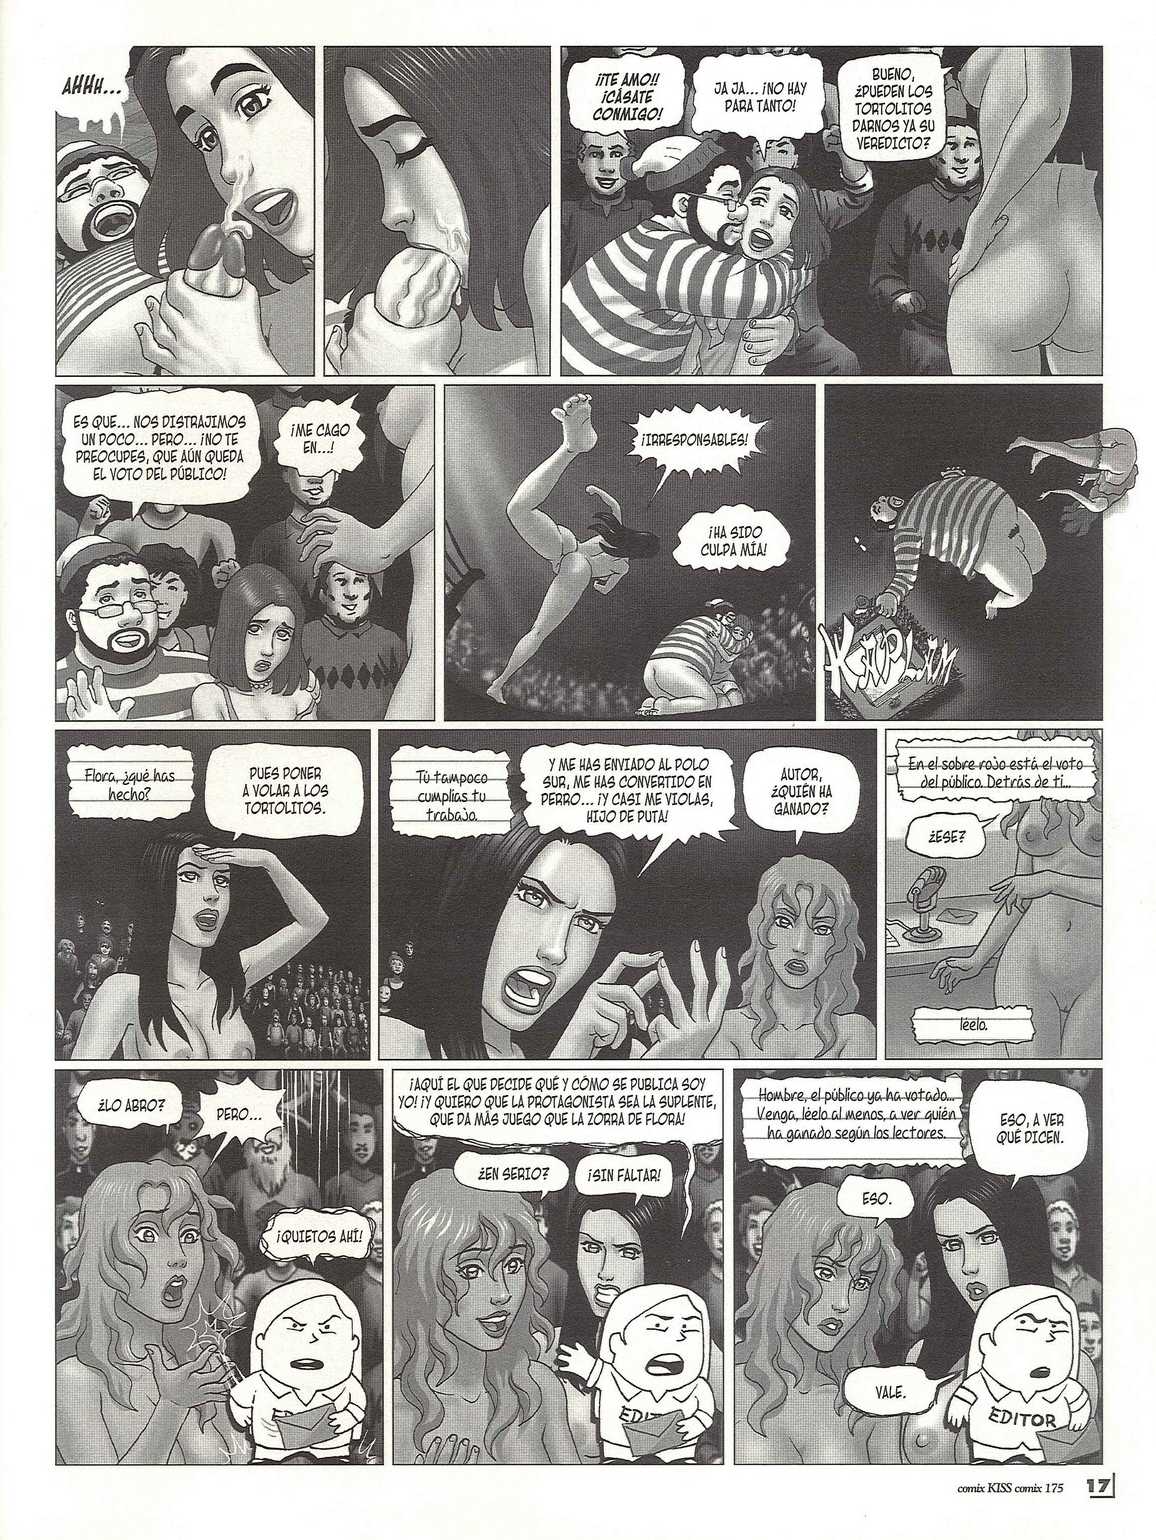 Kiss comix 175 image number 16